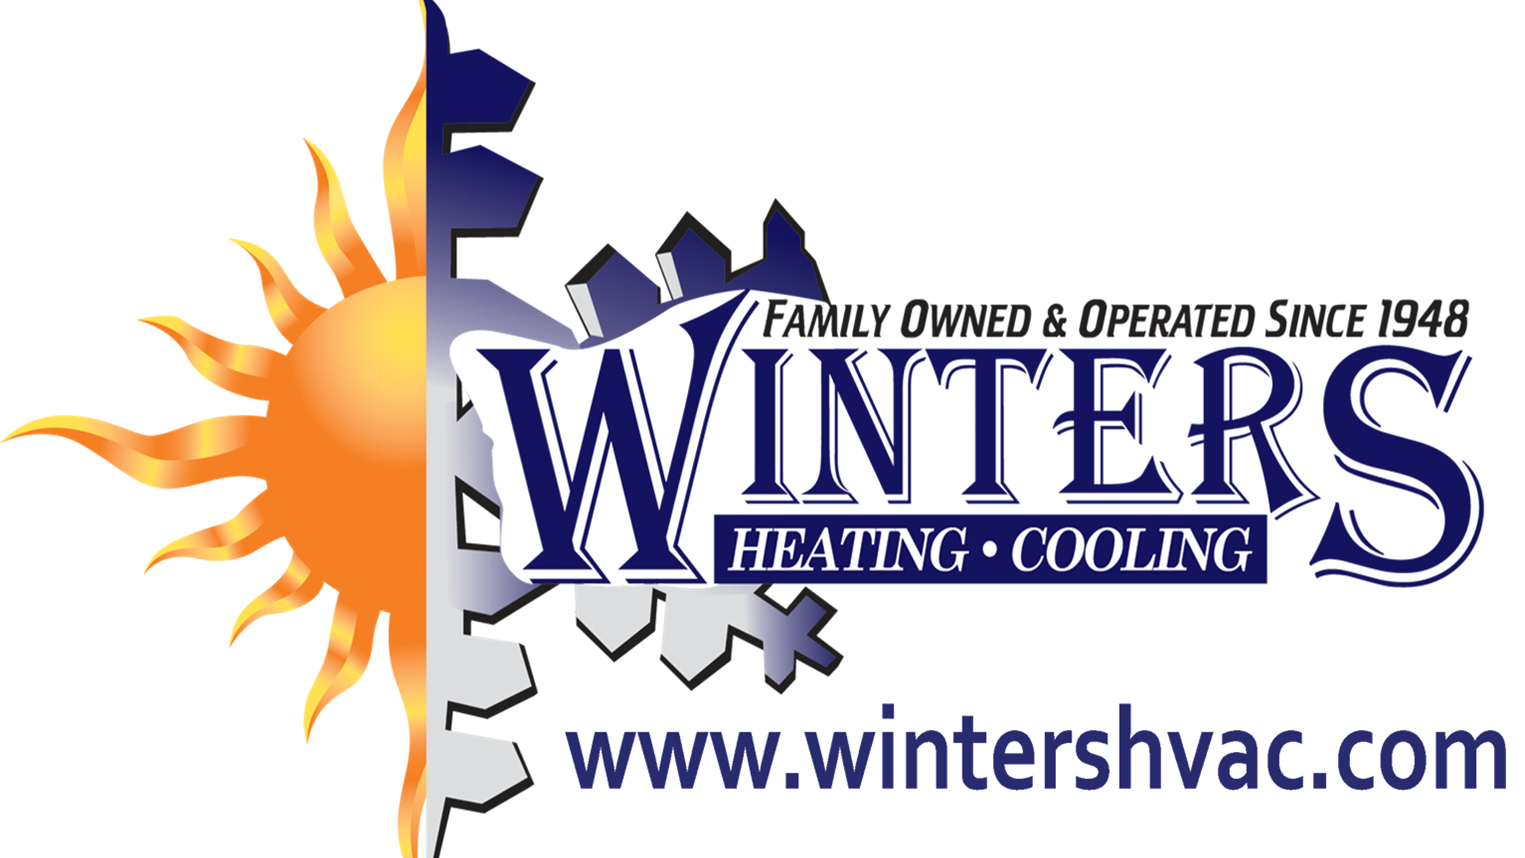 Winters Heating & Cooling